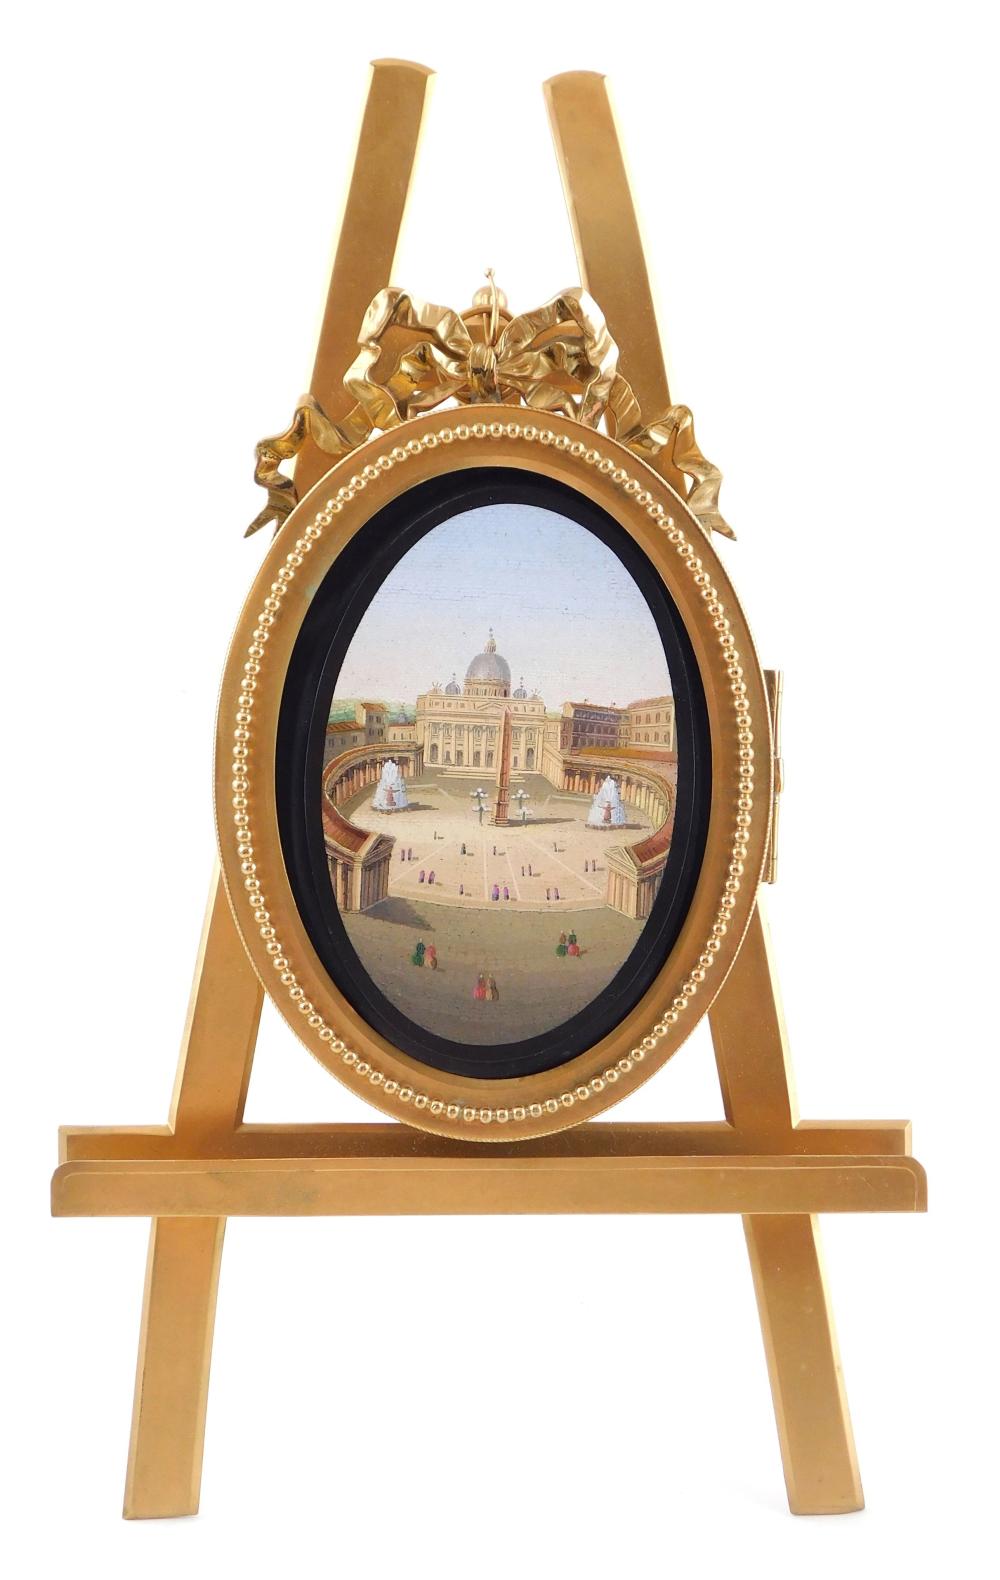 MICRO MOSAIC OF THE VATICAN ON 2e2daf